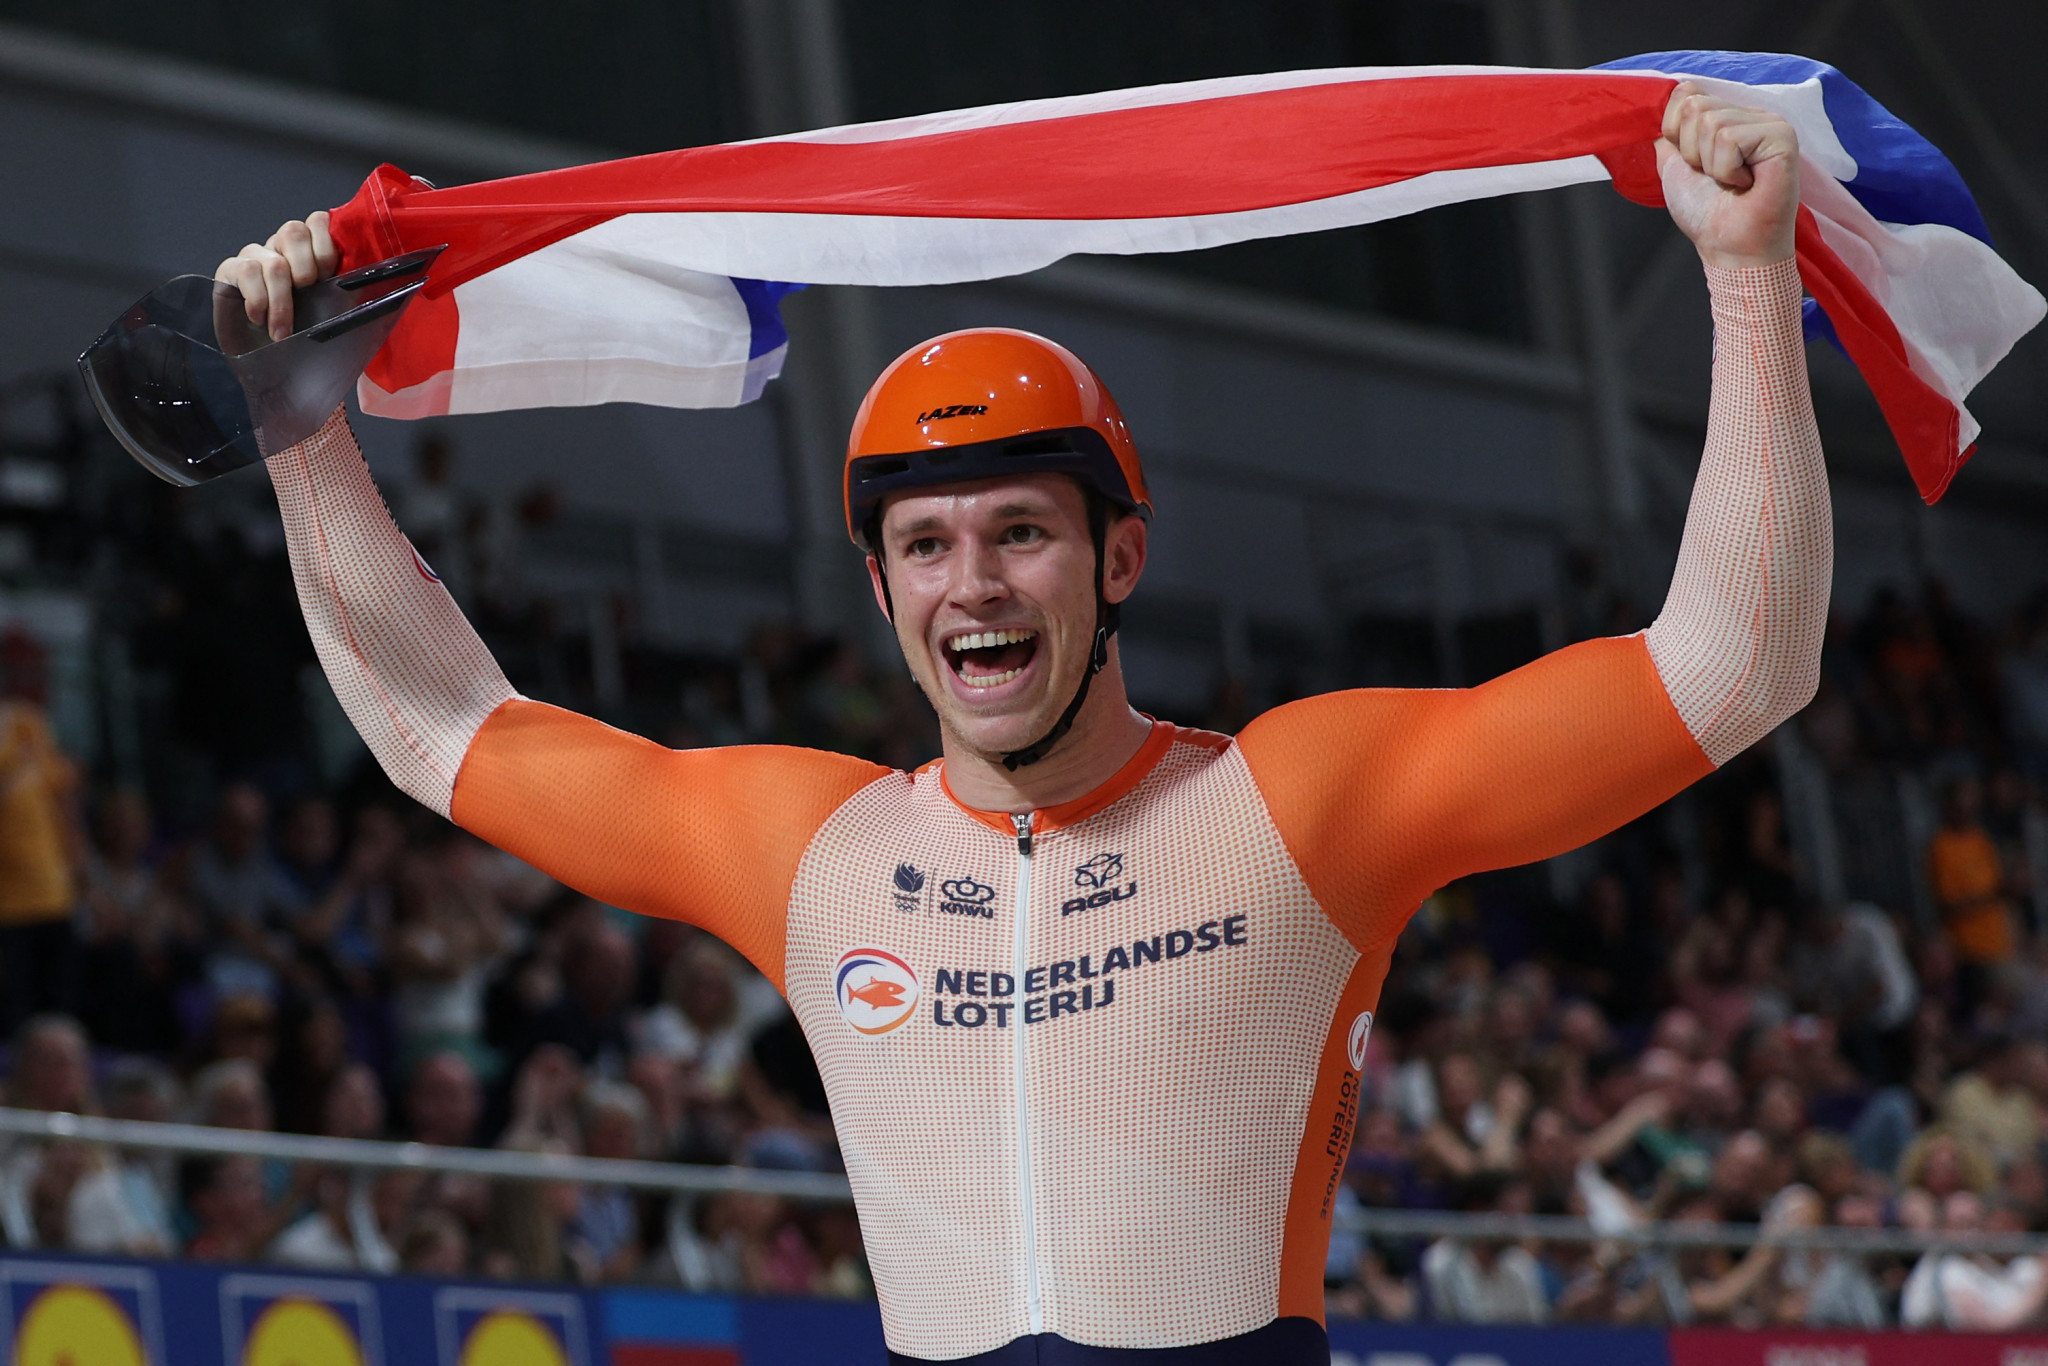 Lavreysen continues hot streak at UCI Track Champions League in Berlin